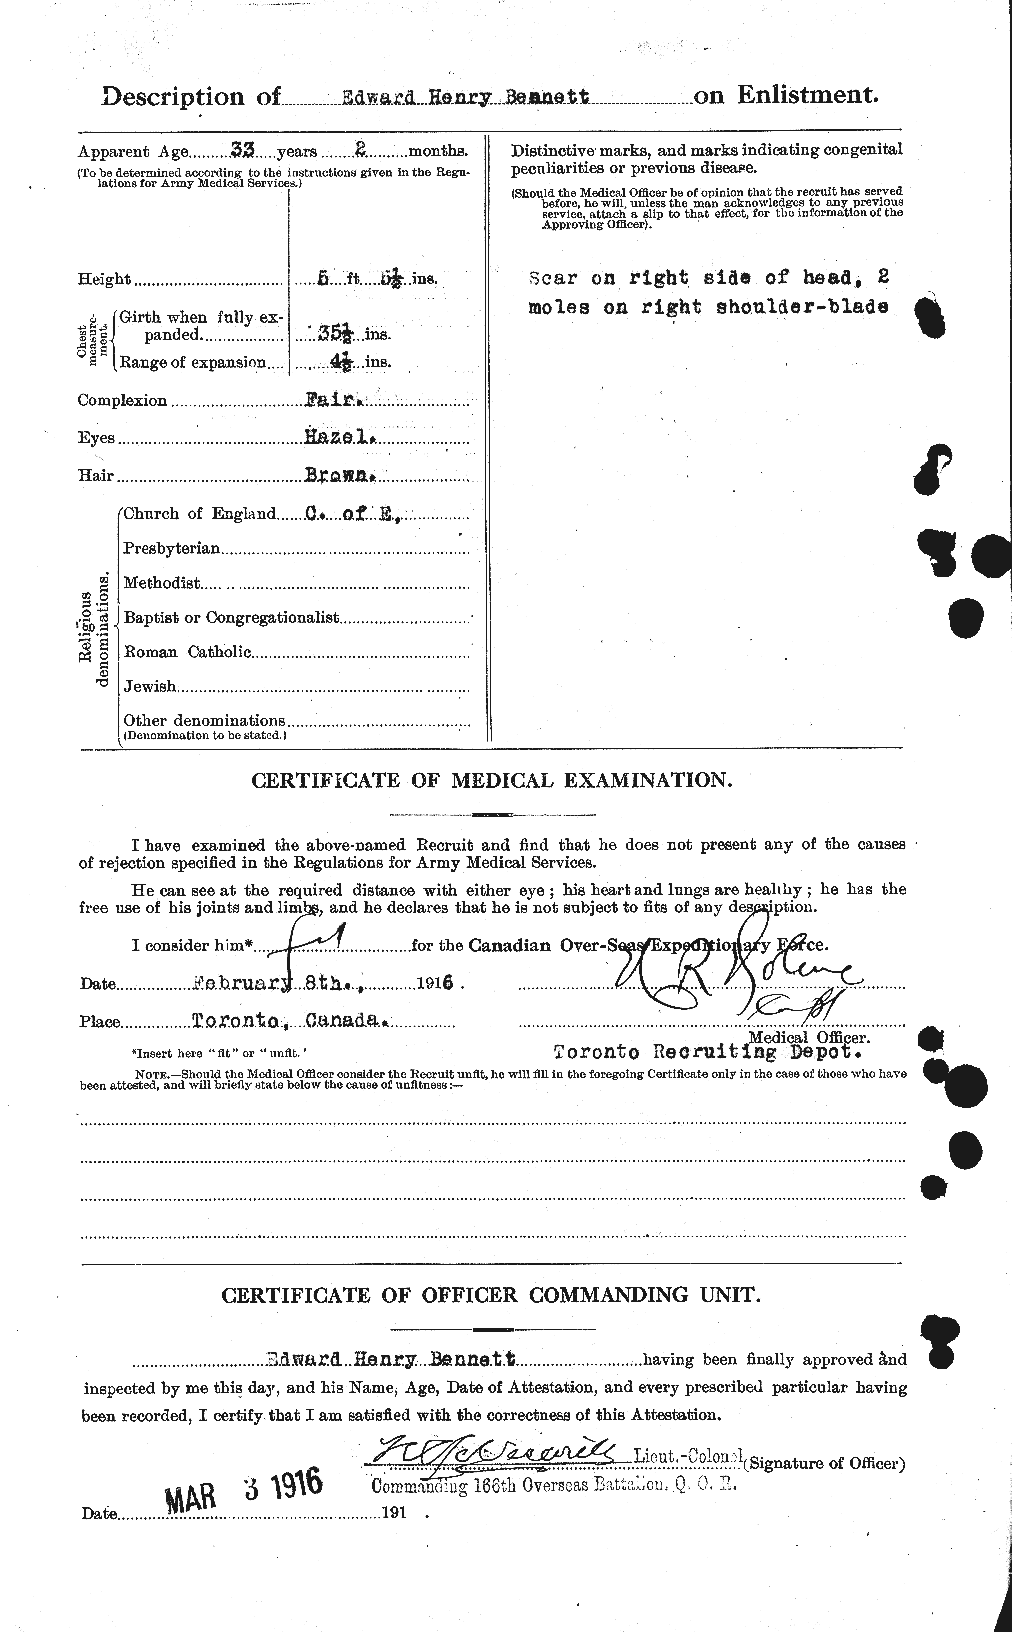 Personnel Records of the First World War - CEF 233463b